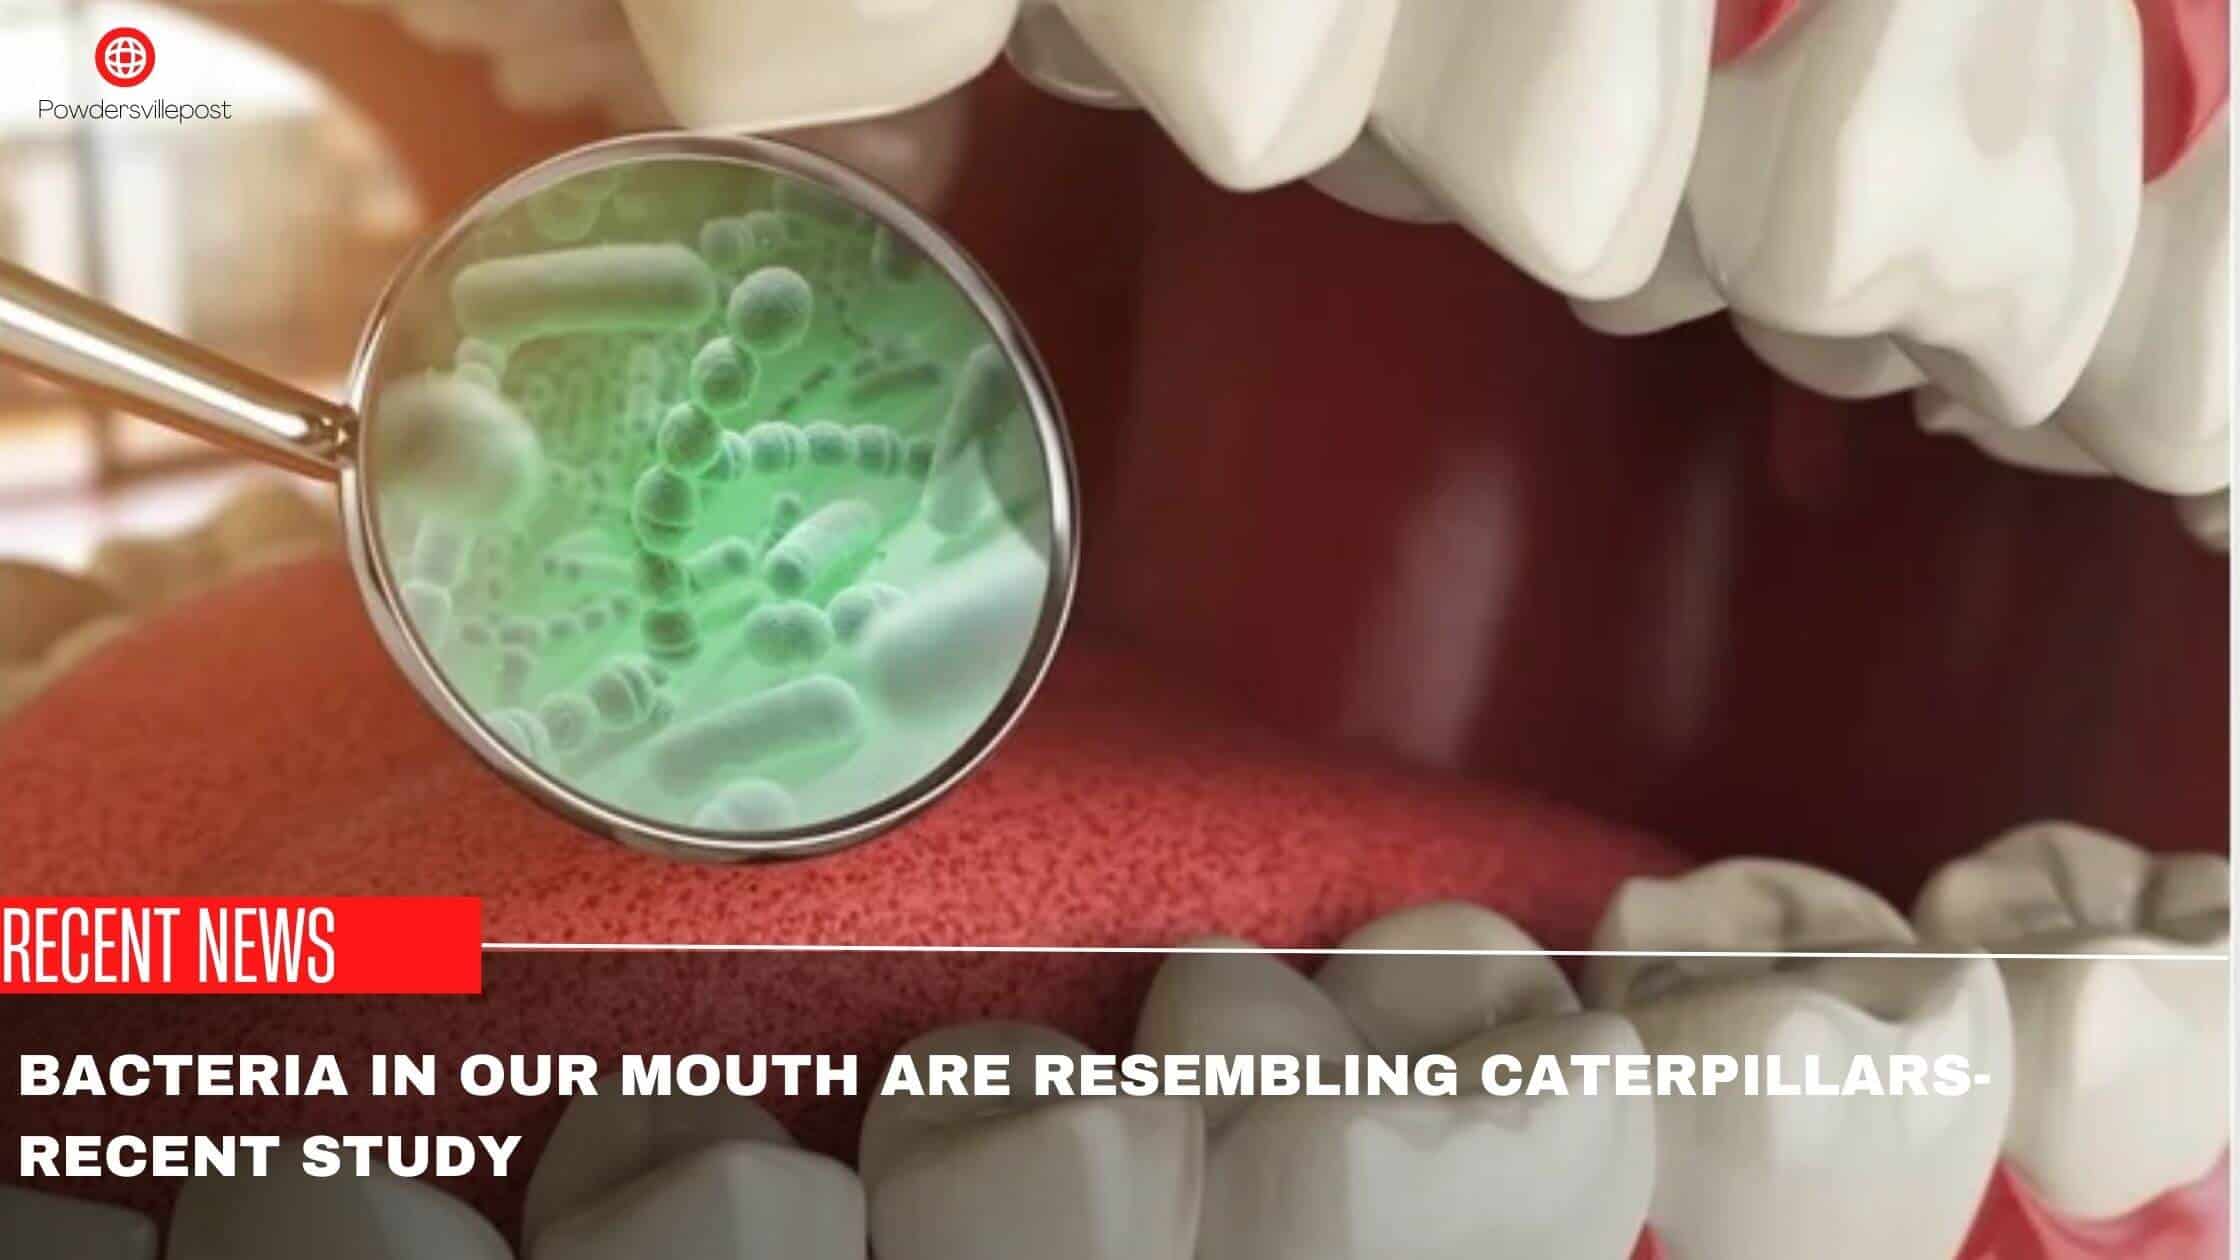 Bacteria In Our Mouth Are resembling caterpillars-Recent Study